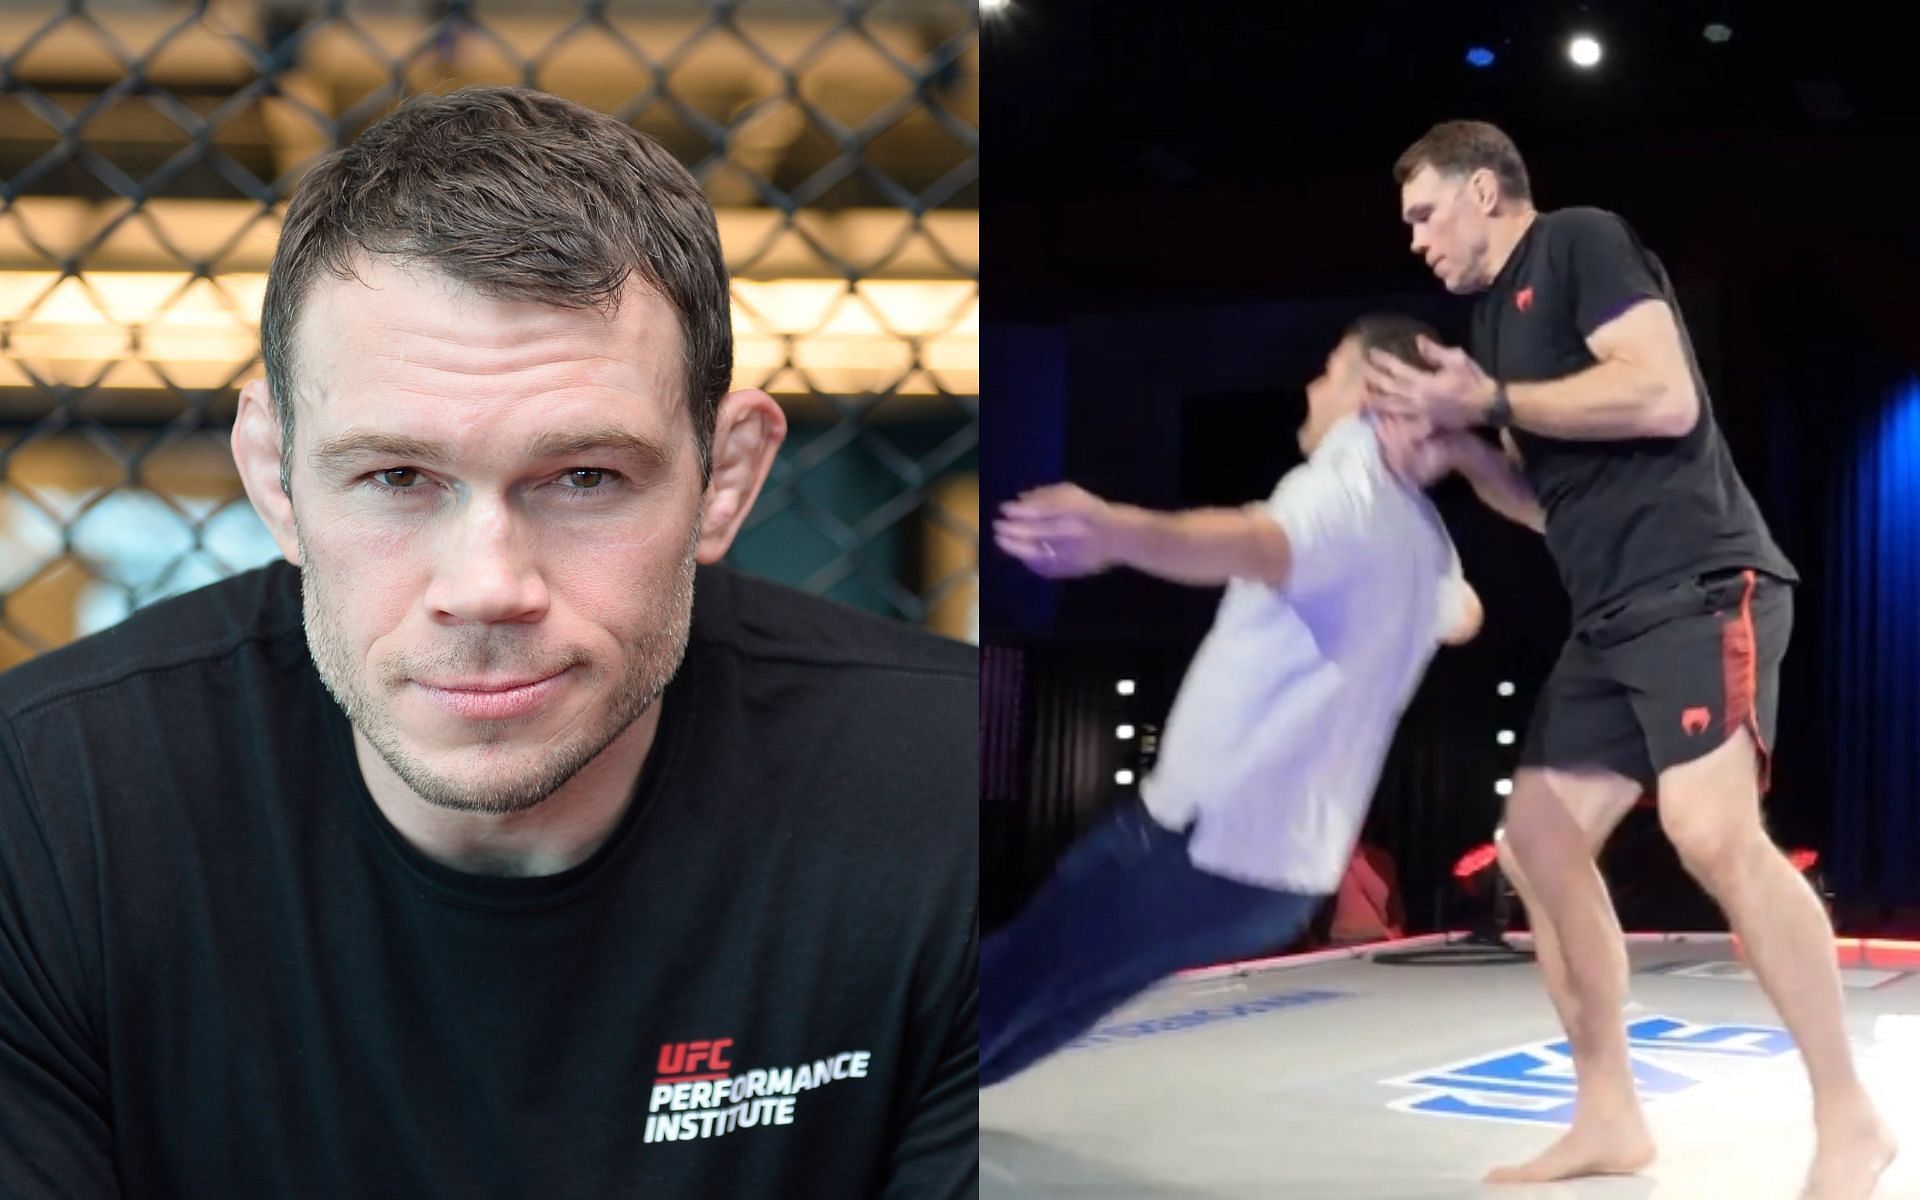 Forrest Griffin (left) and in action at Power Slap (right). [Images courtesy: left image from Getty Images and right image from Power Slap]